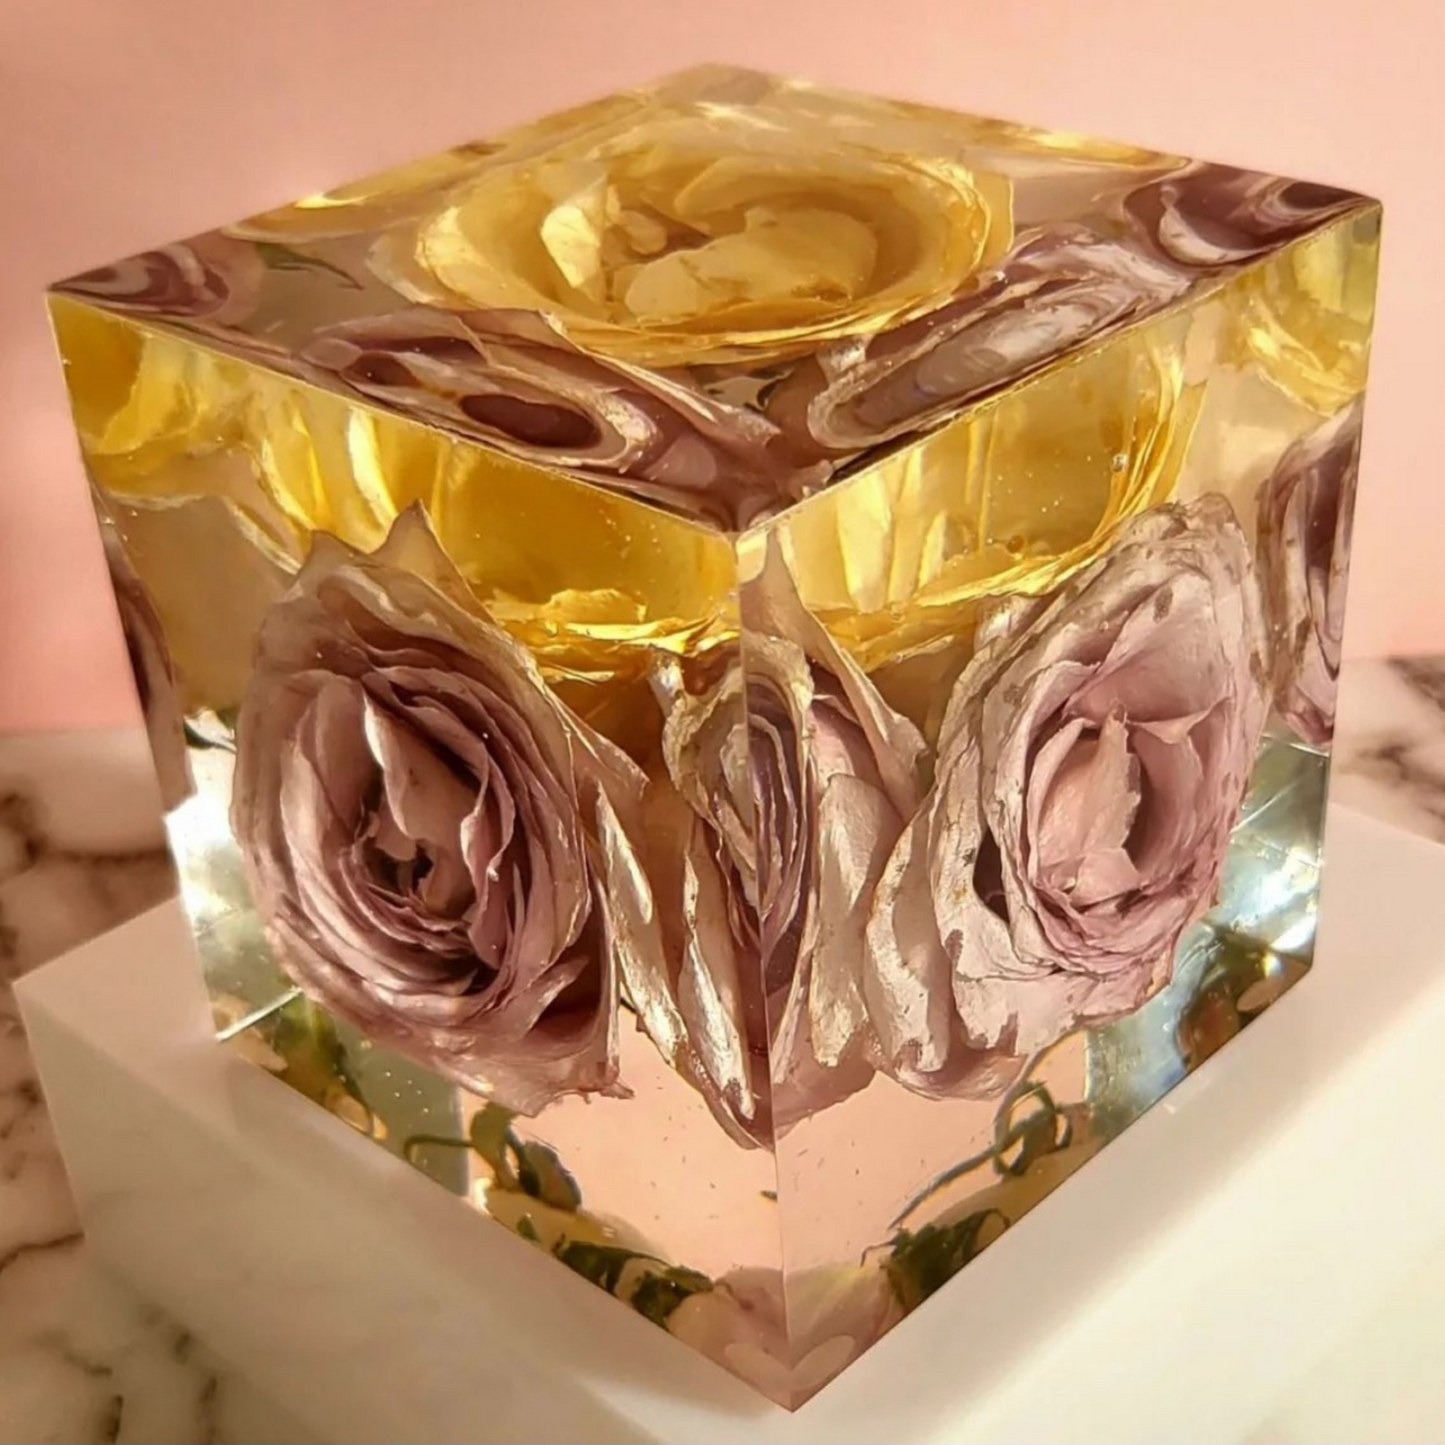 8"x 8" Pre-Dried Flowers 3D Floral Resin Cube Wedding Bouquet Preservation Modern Fried Flowers Square Save Your Gift Keepsake